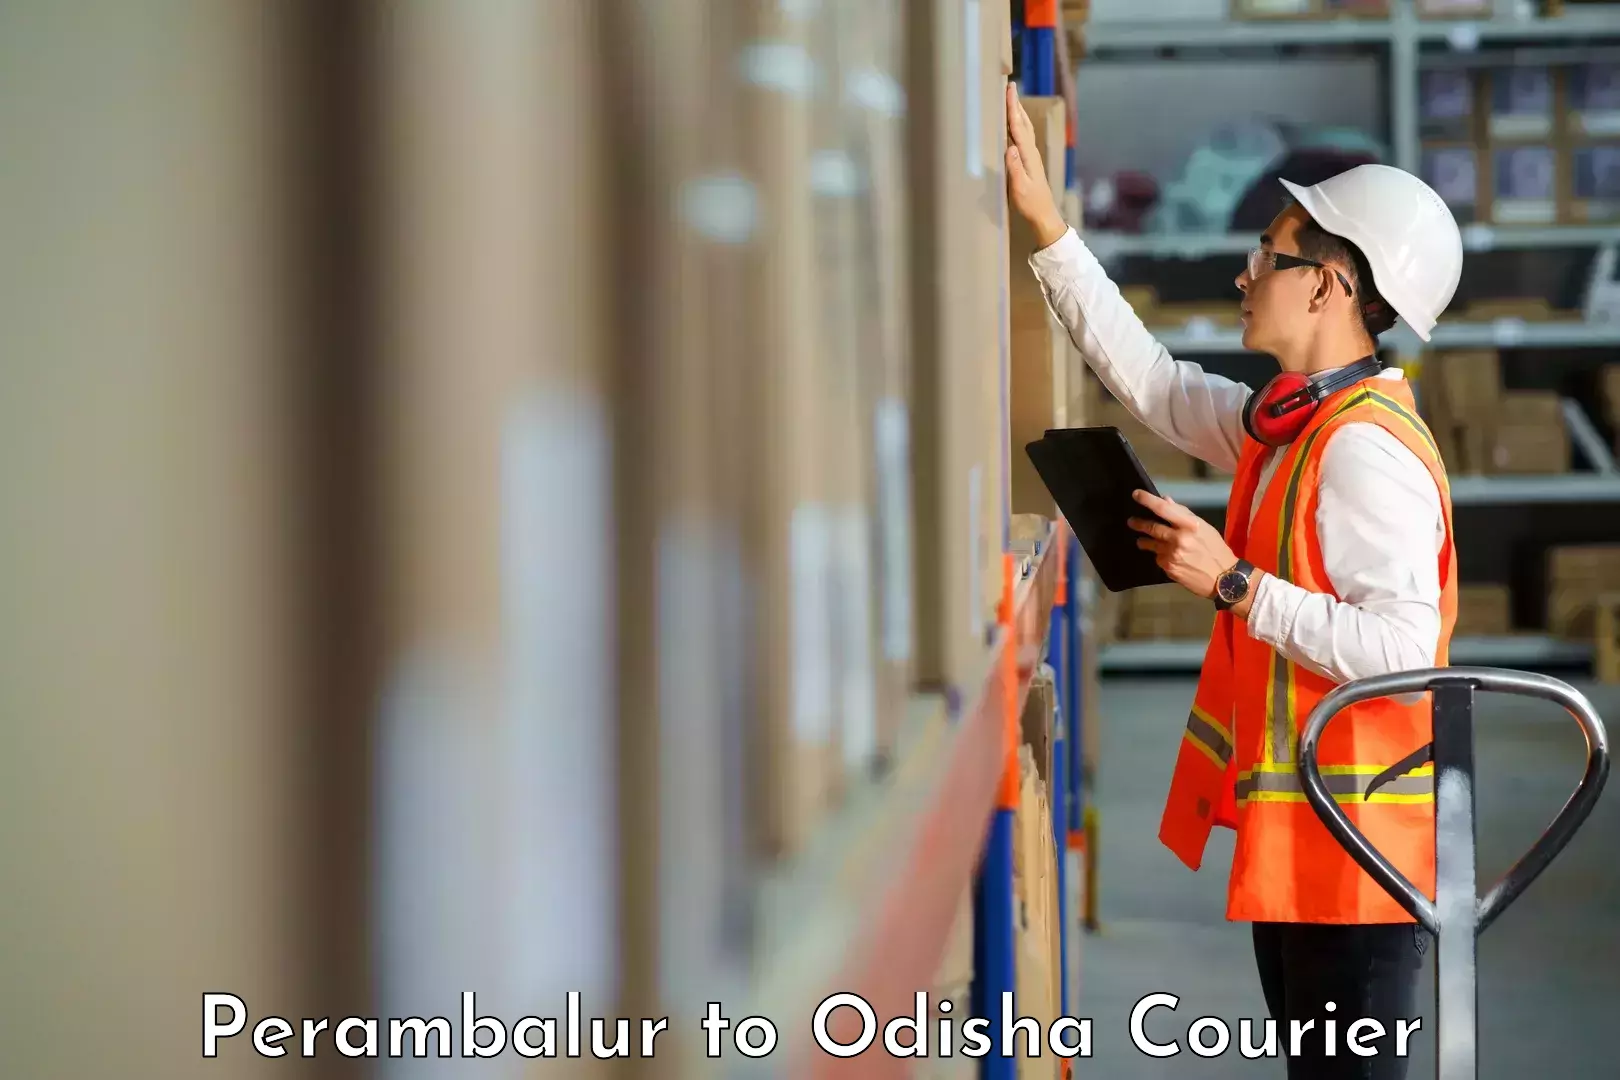 Efficient order fulfillment Perambalur to Kalapathar Cuttack